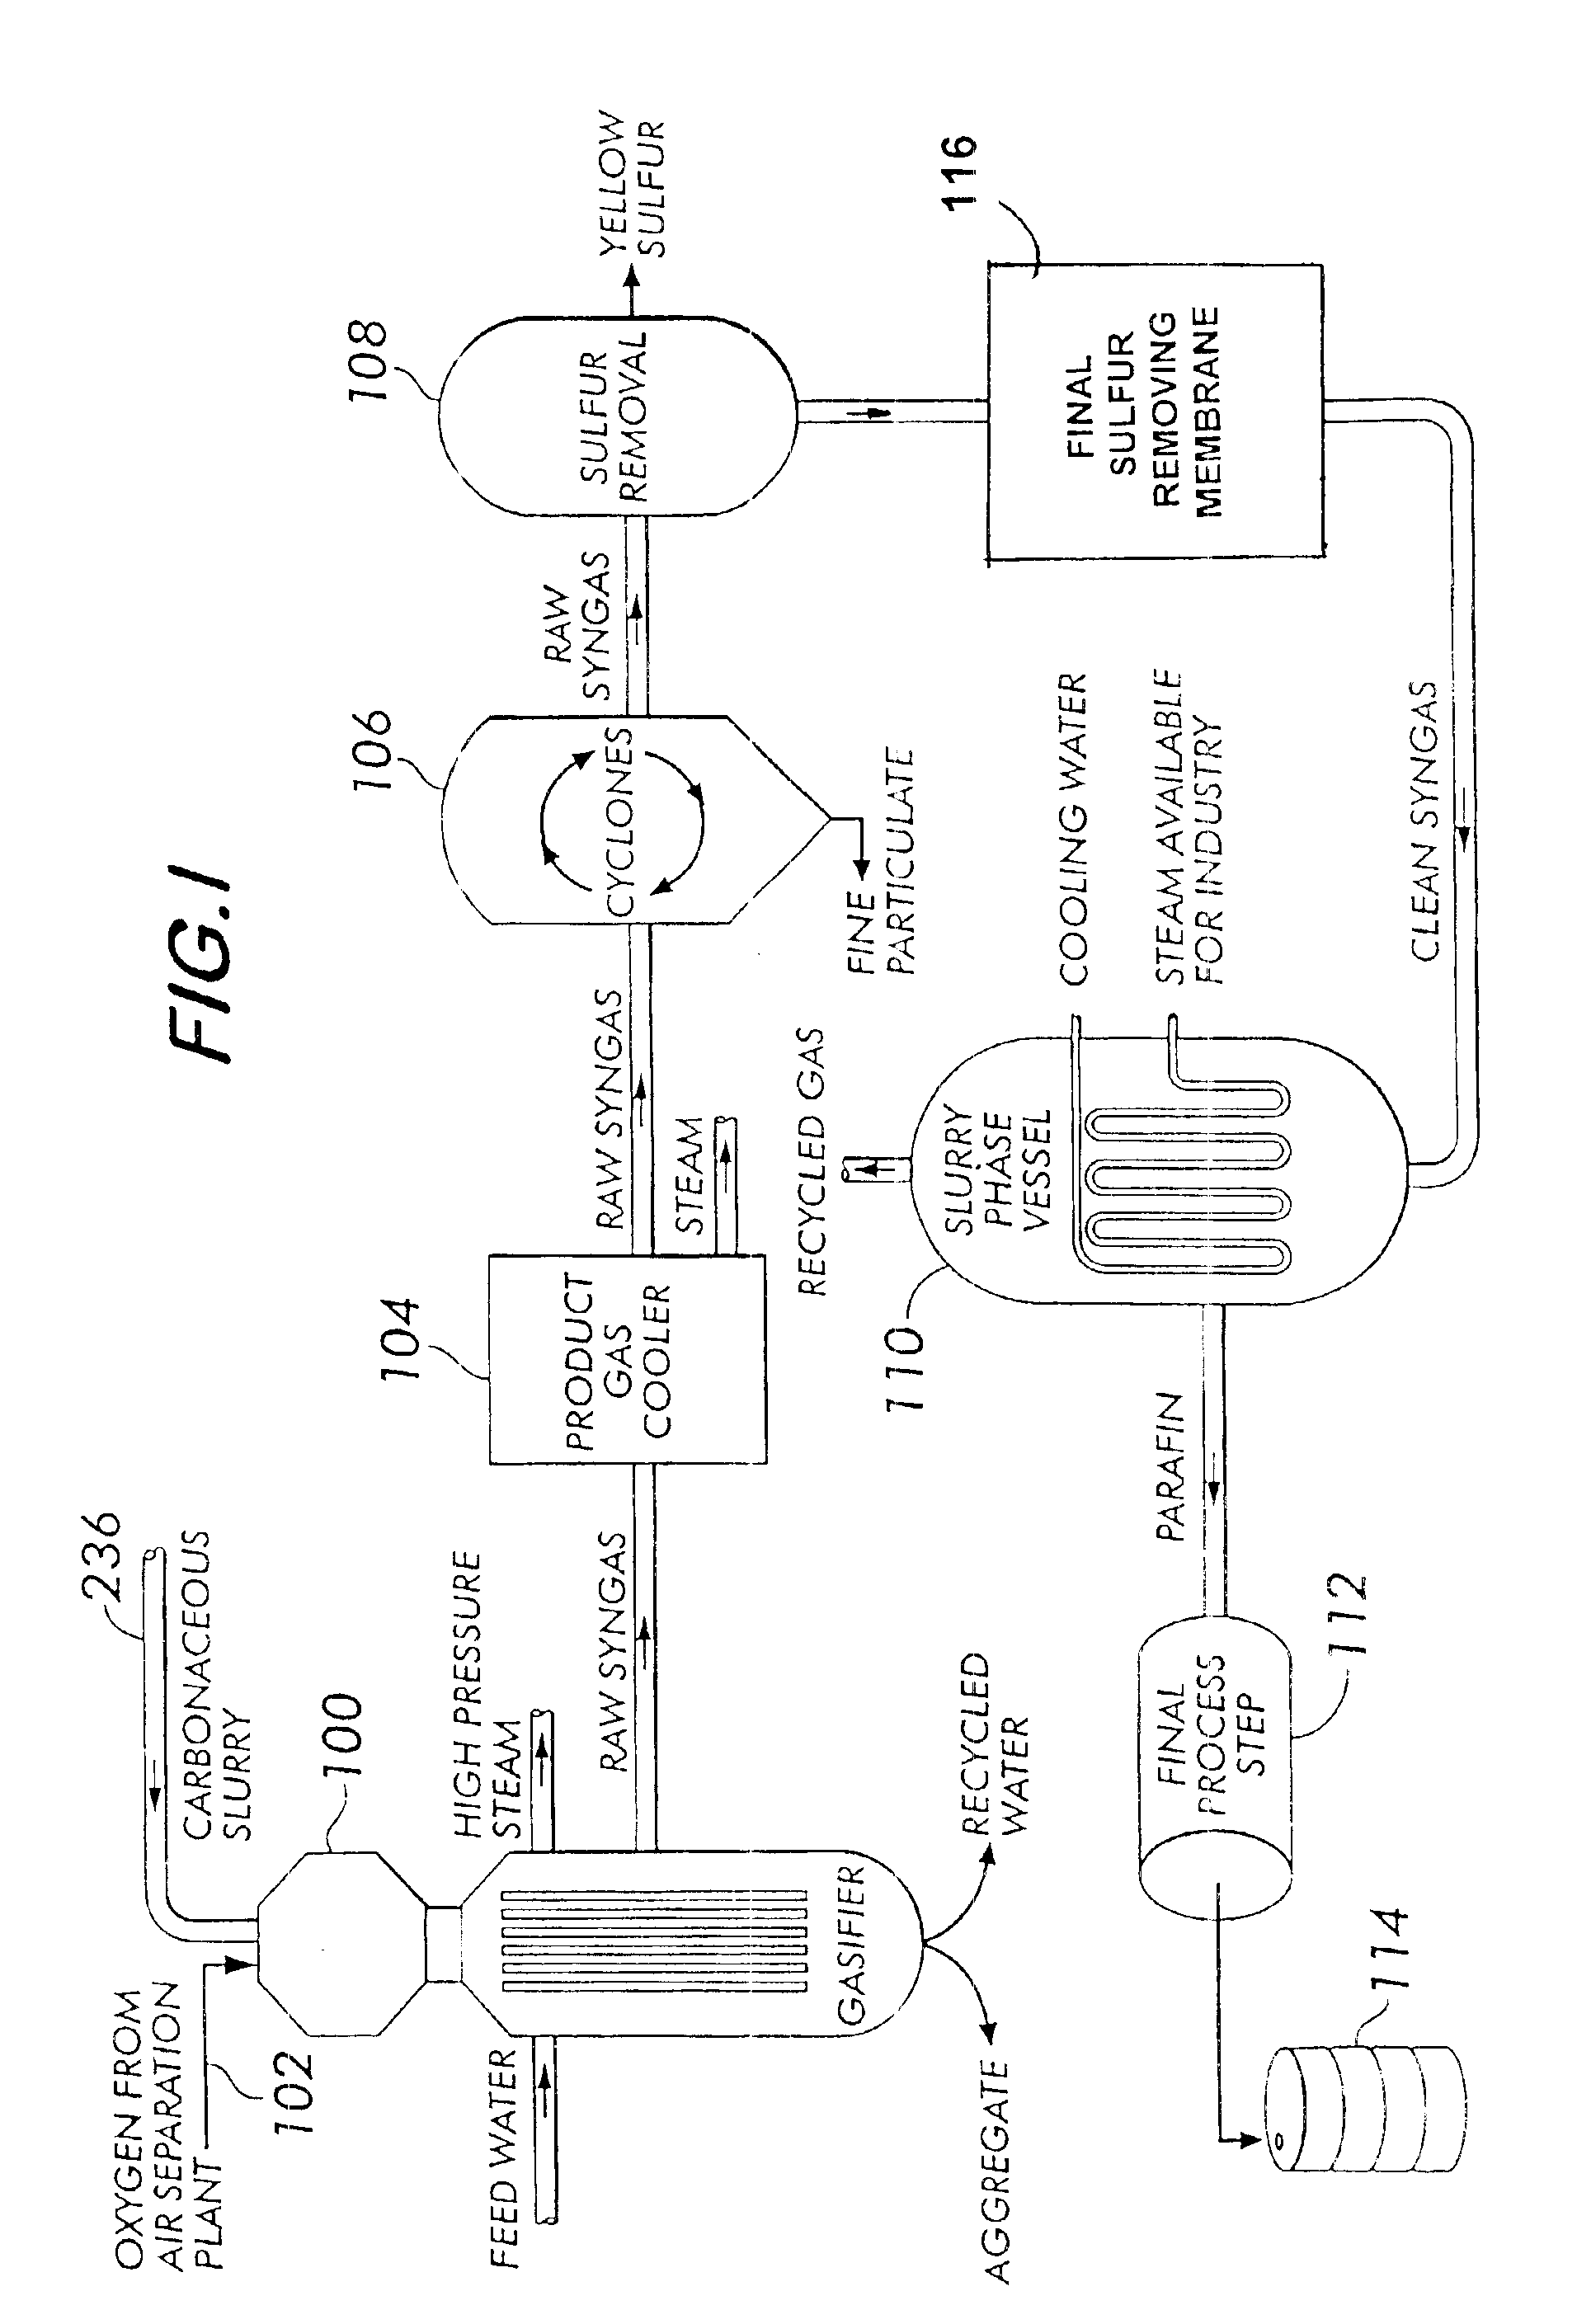 Method for producing ultra clean liquid fuel from coal refuse